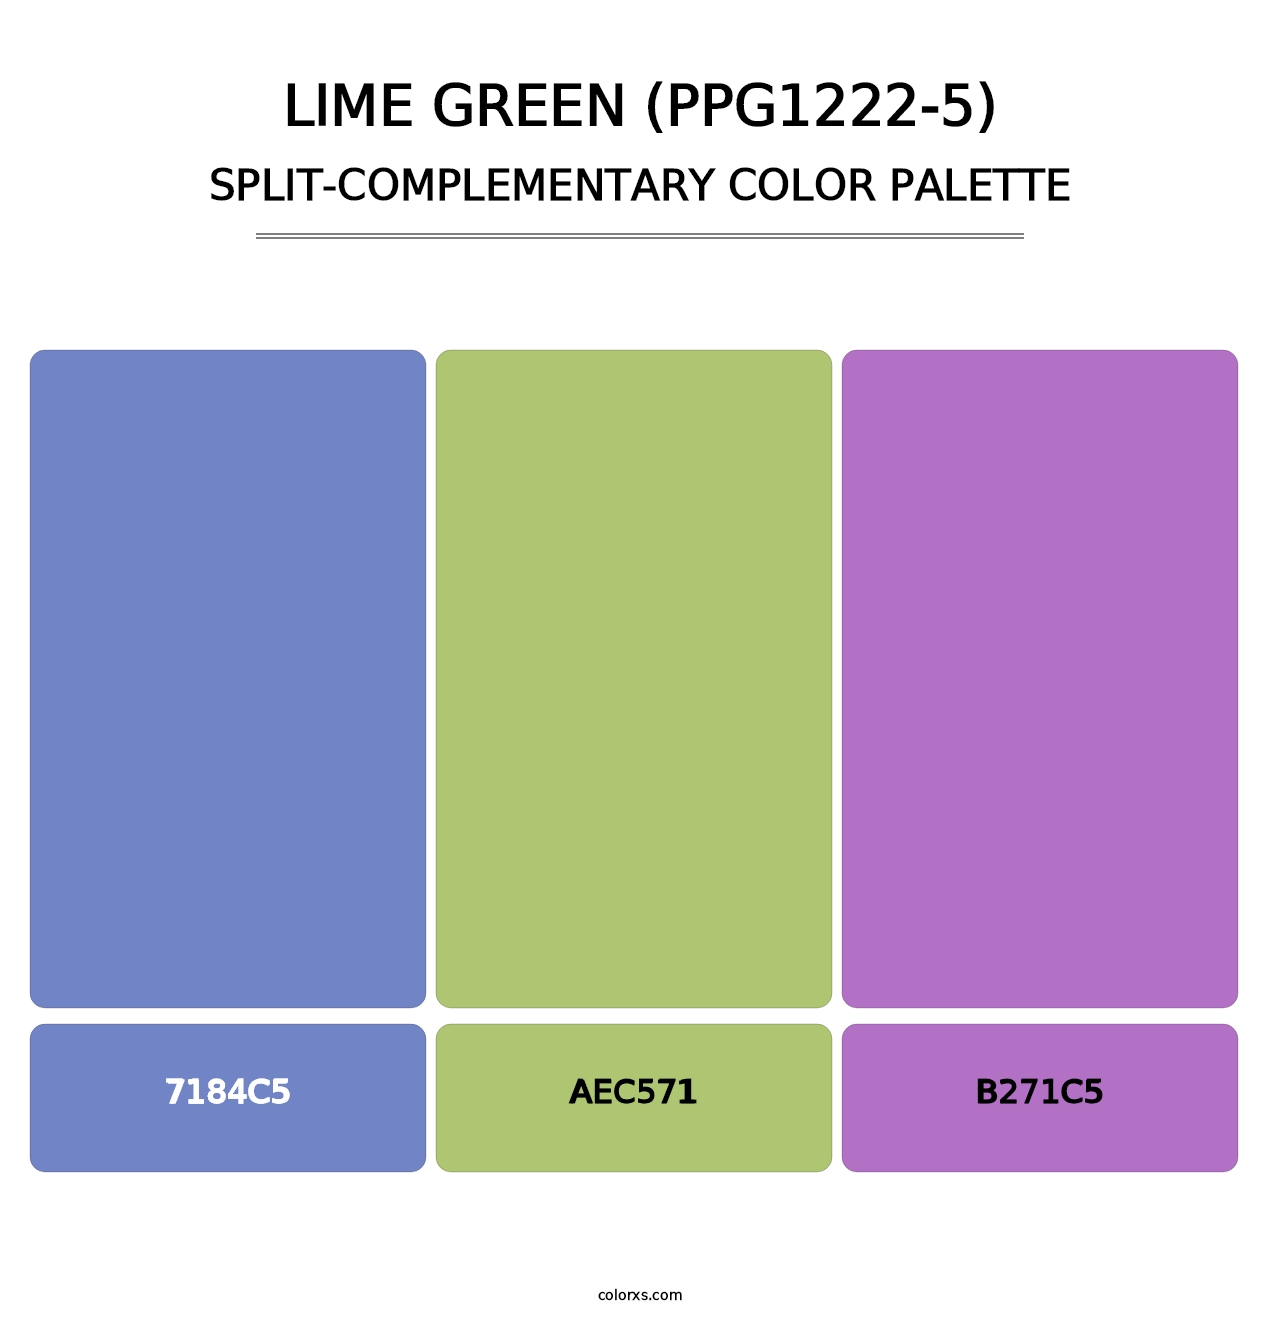 Lime Green (PPG1222-5) - Split-Complementary Color Palette